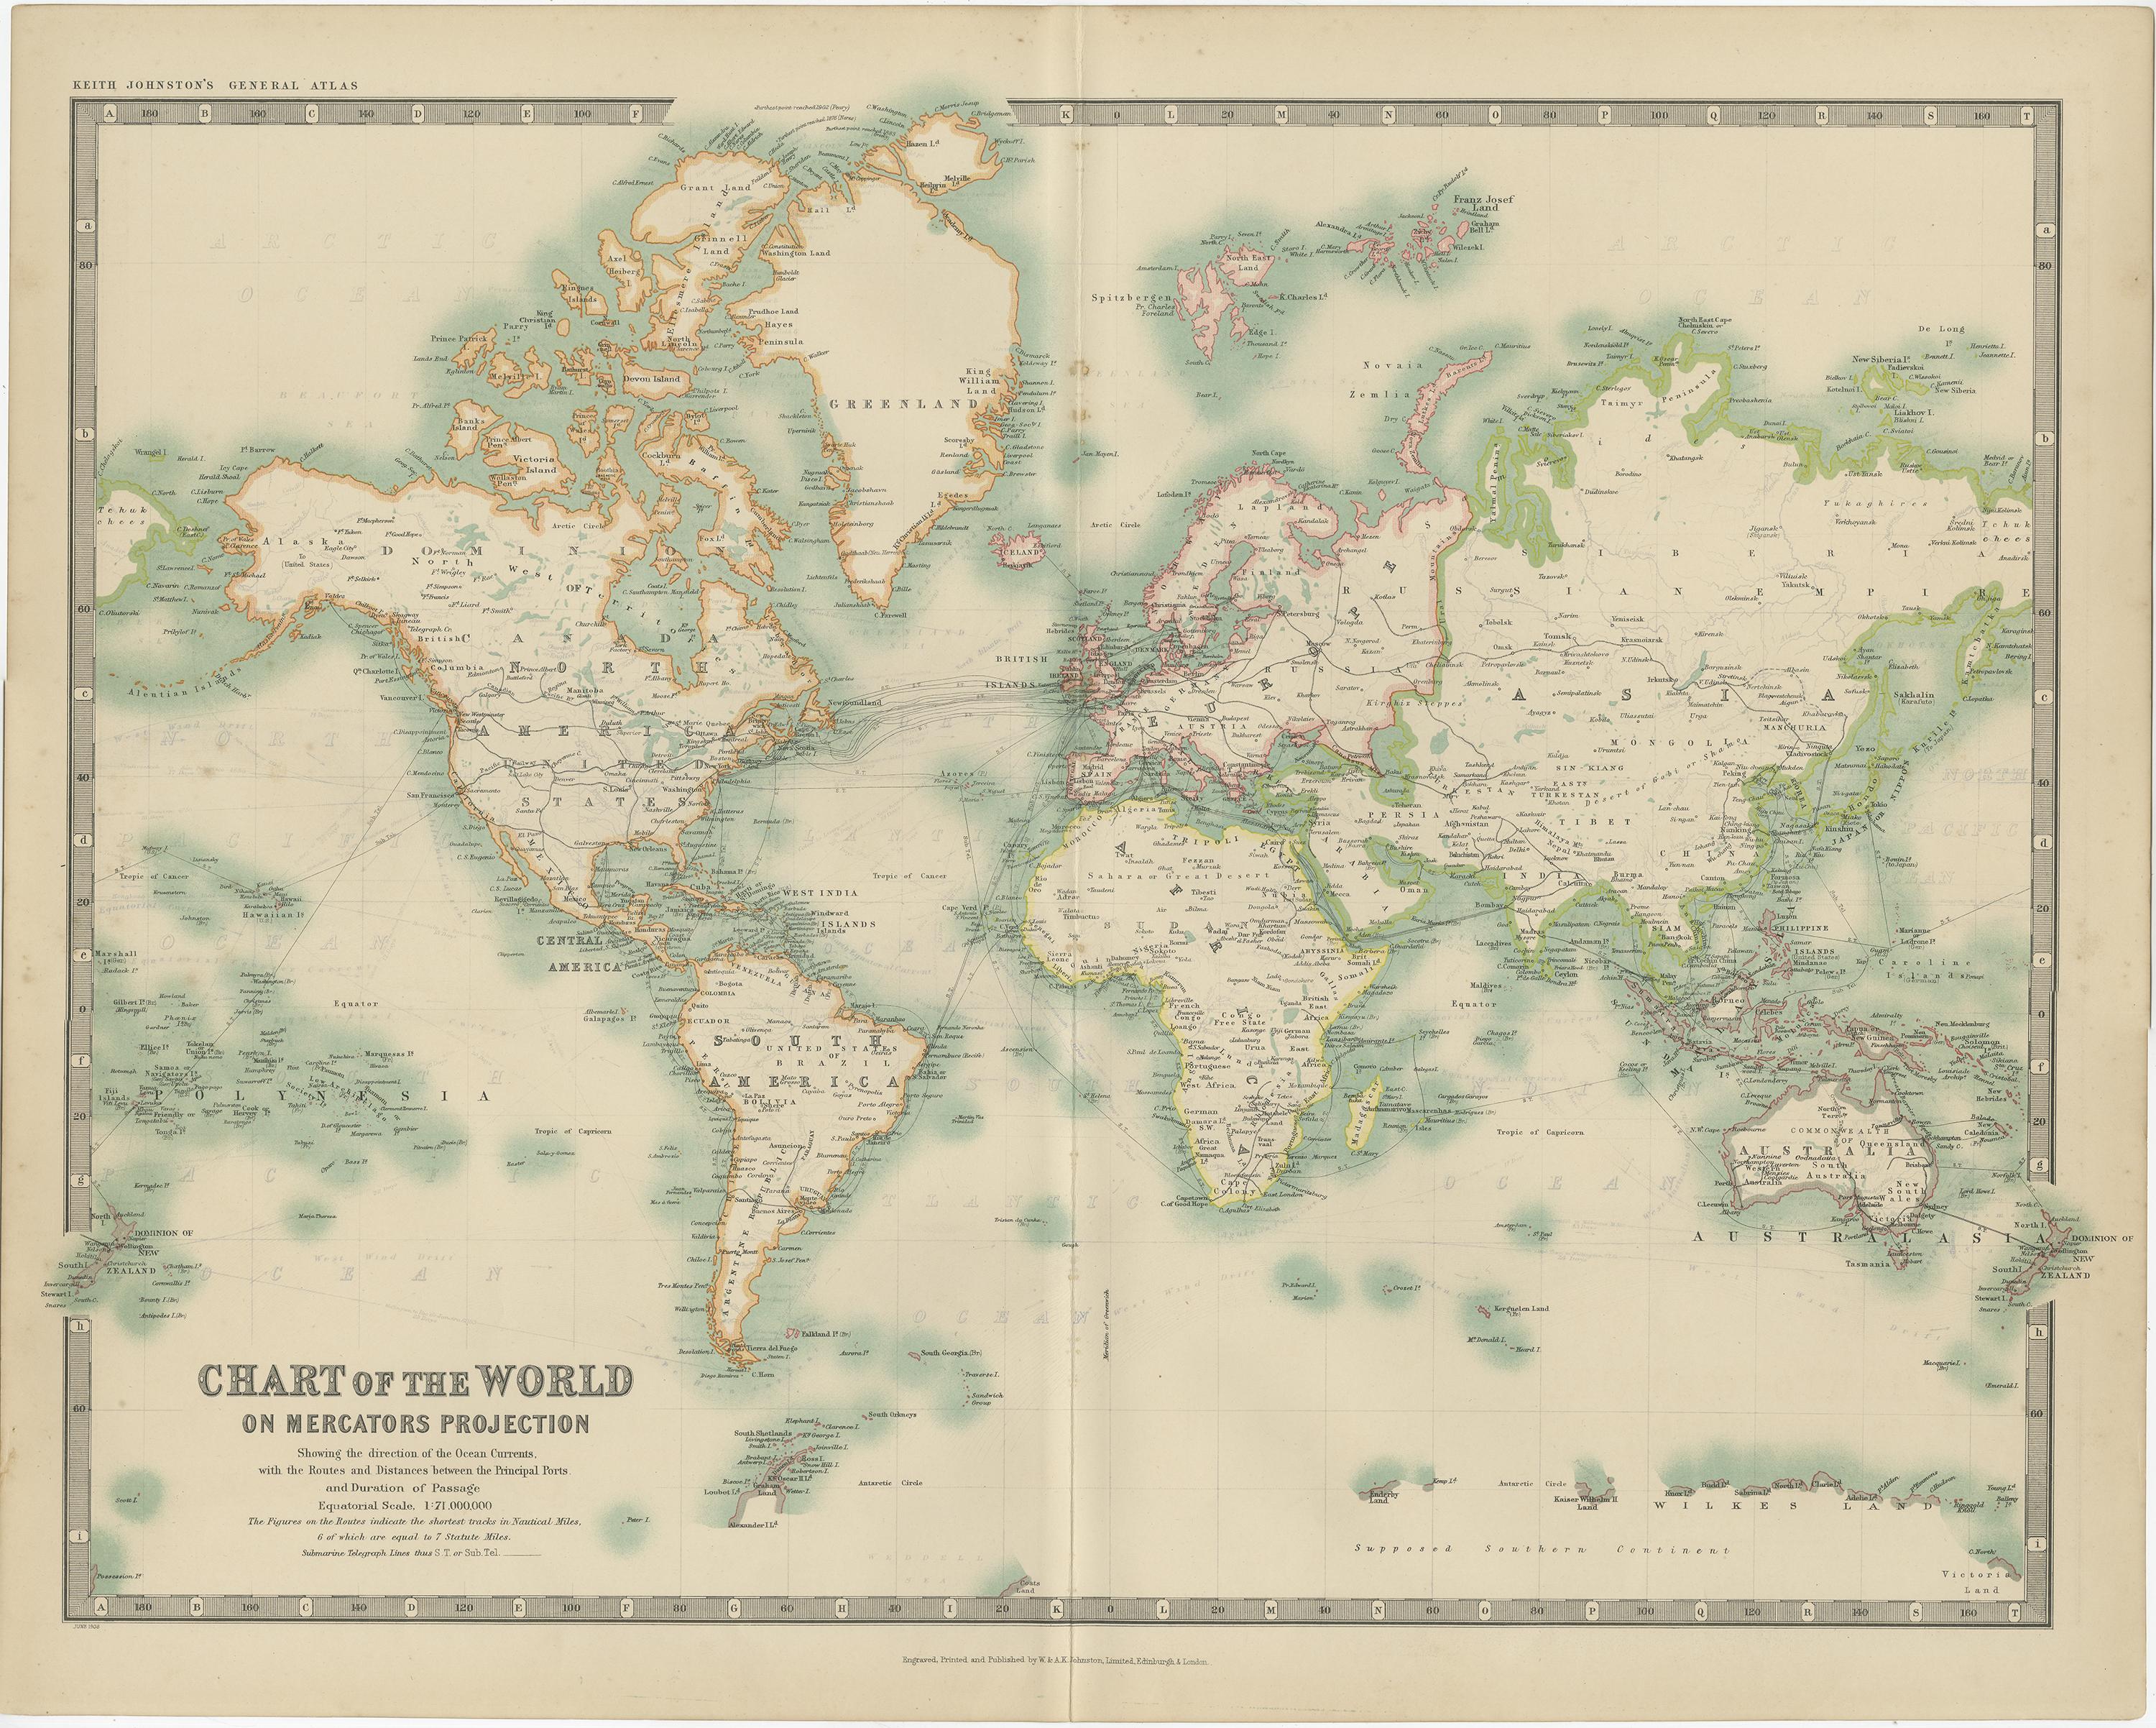 Antique map titled 'Chart of the World on Mercator's Projection Showing the directions of the Oceans Currents with the Routes and Distances Between Principal Ports'. Detailed map of the World, centred on the Pacific Ocean, and showing currents,